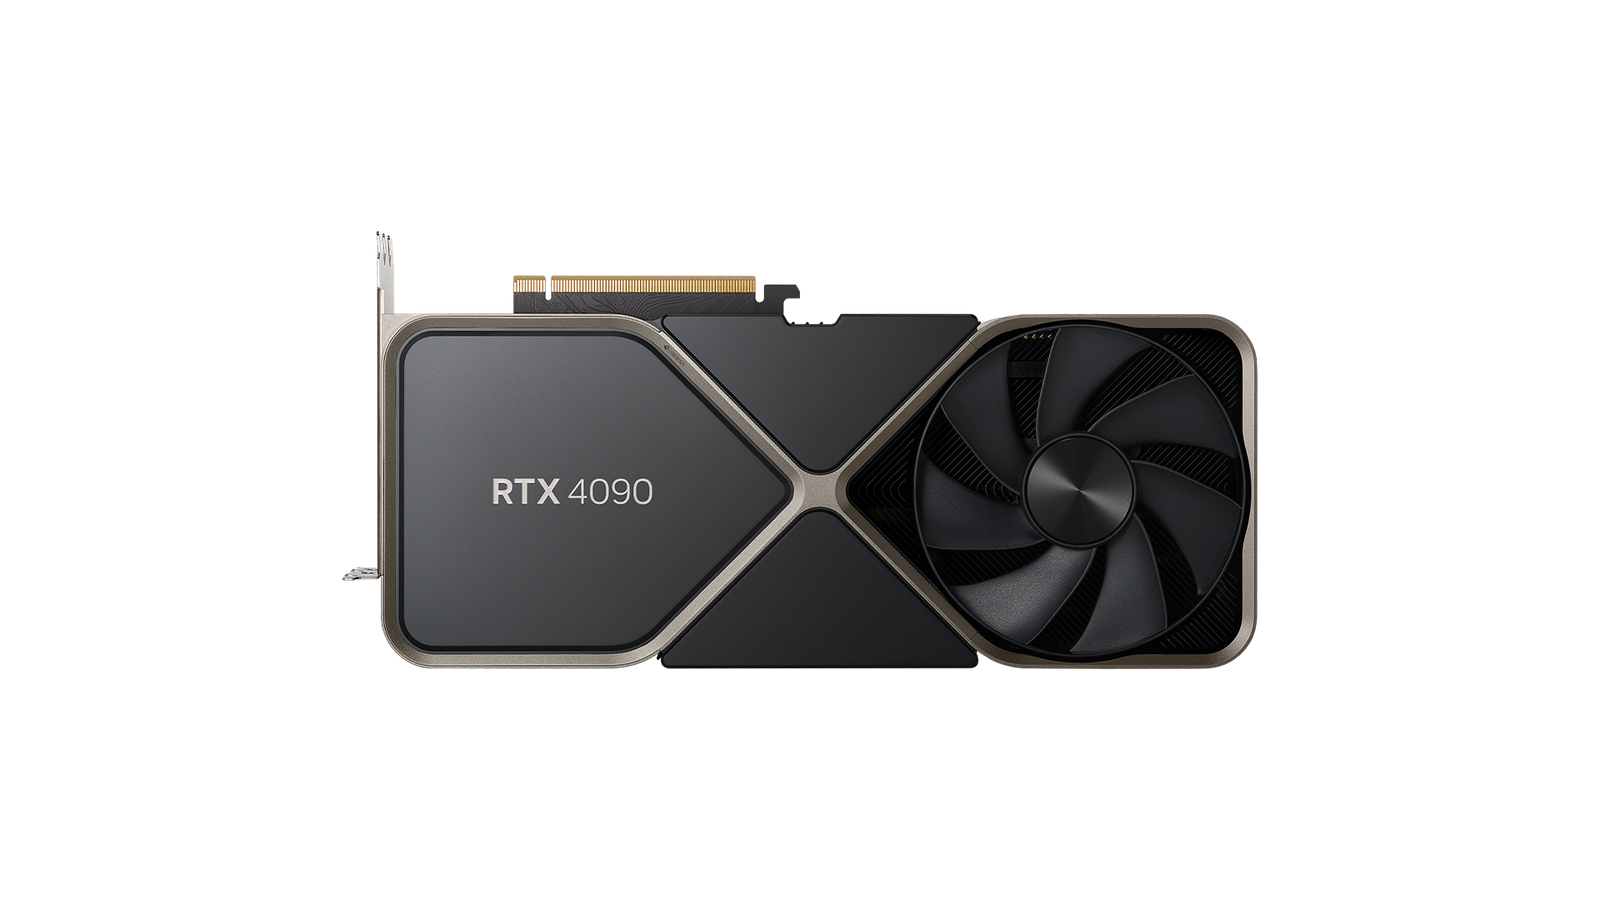 Nvidia GeForce RTX 4090 - The best graphics card for gaming